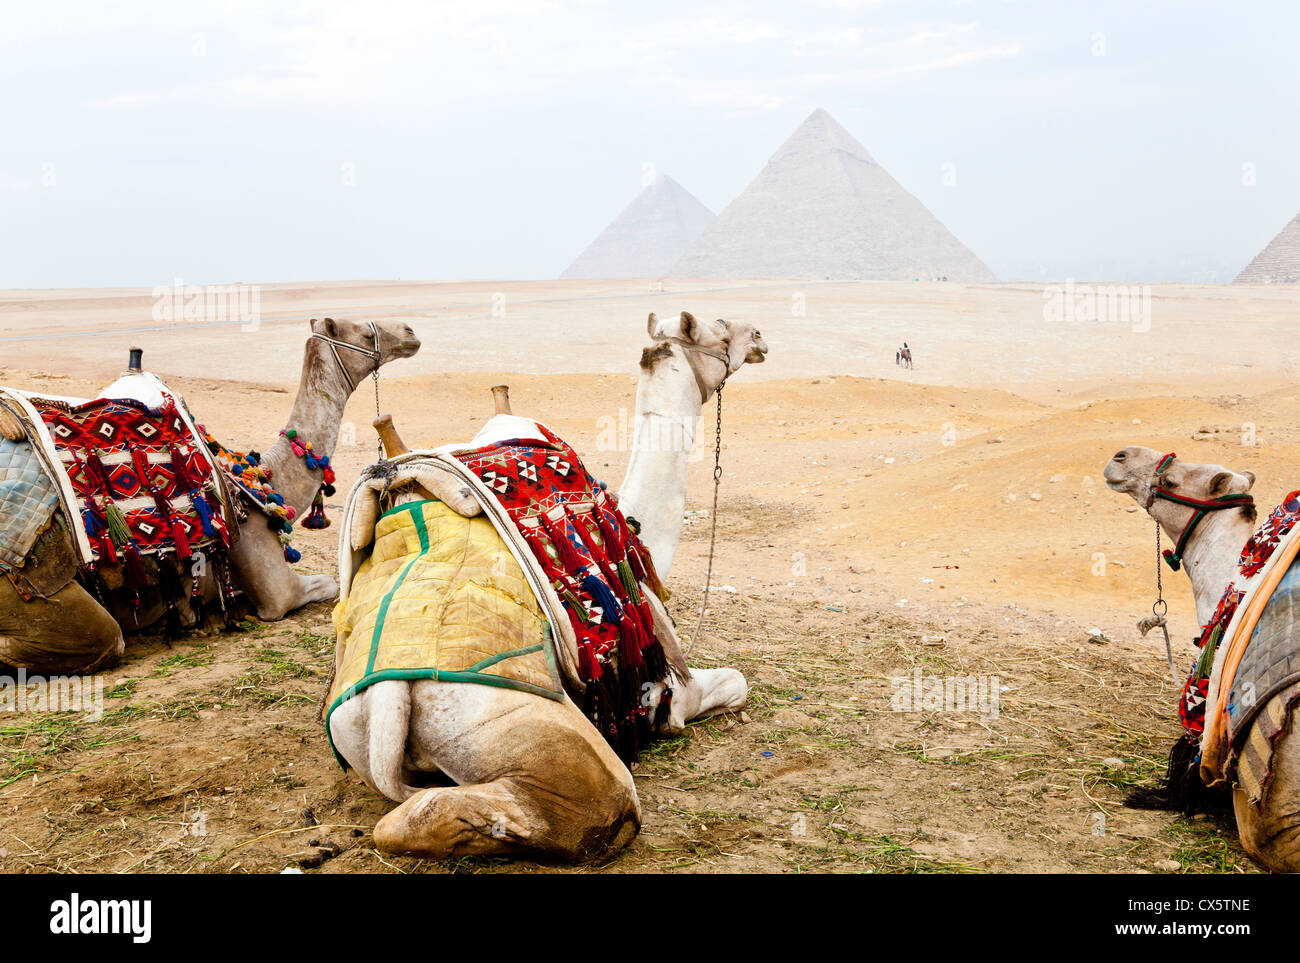 three camels and the pyramids of giza Stock Photo